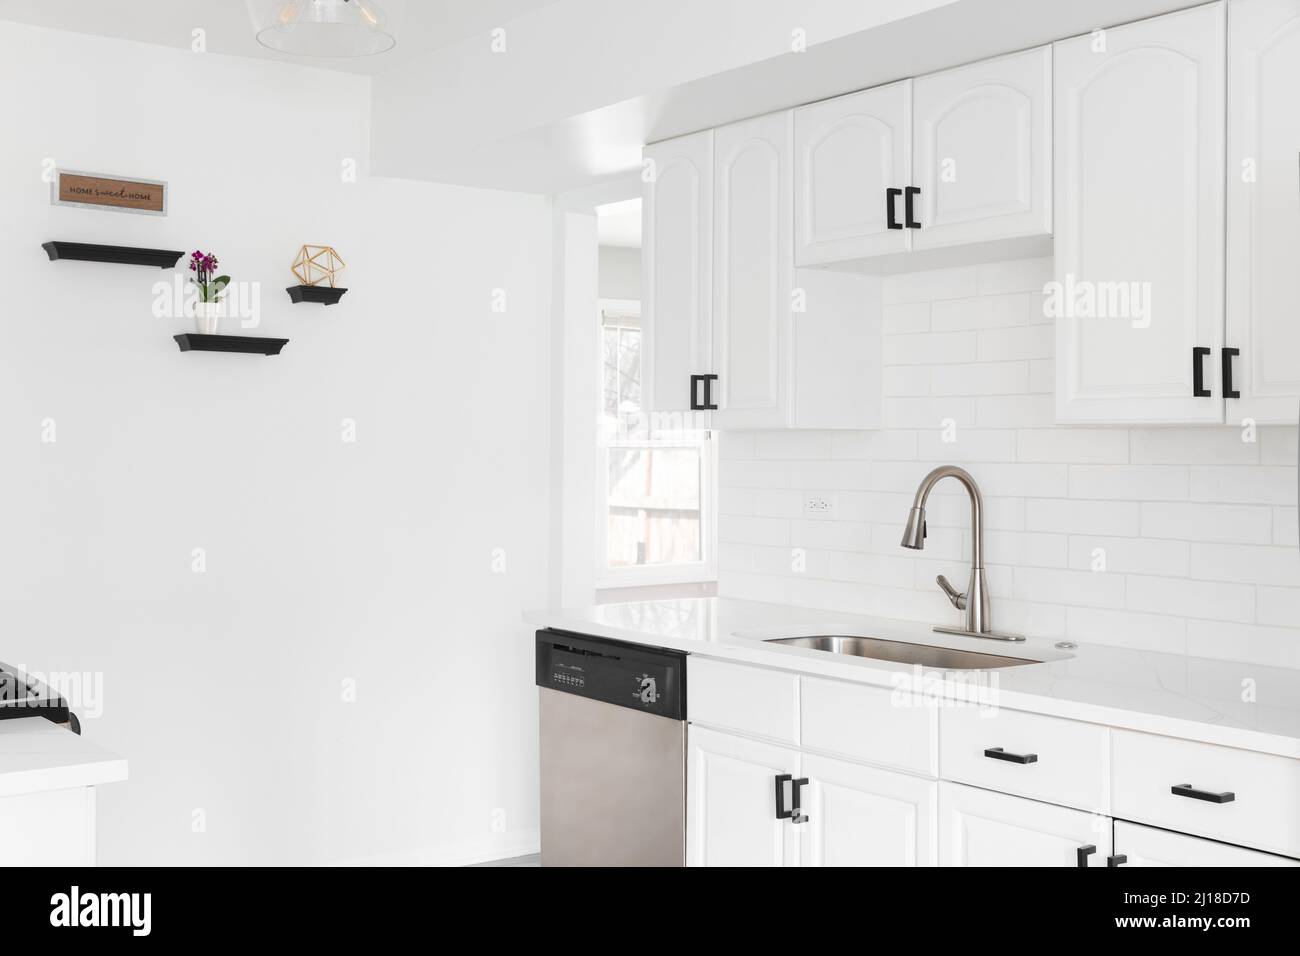 A bright kitchen with white cabinets, subway tile backsplash, black hardware, and a stainless steel sink. Stock Photo